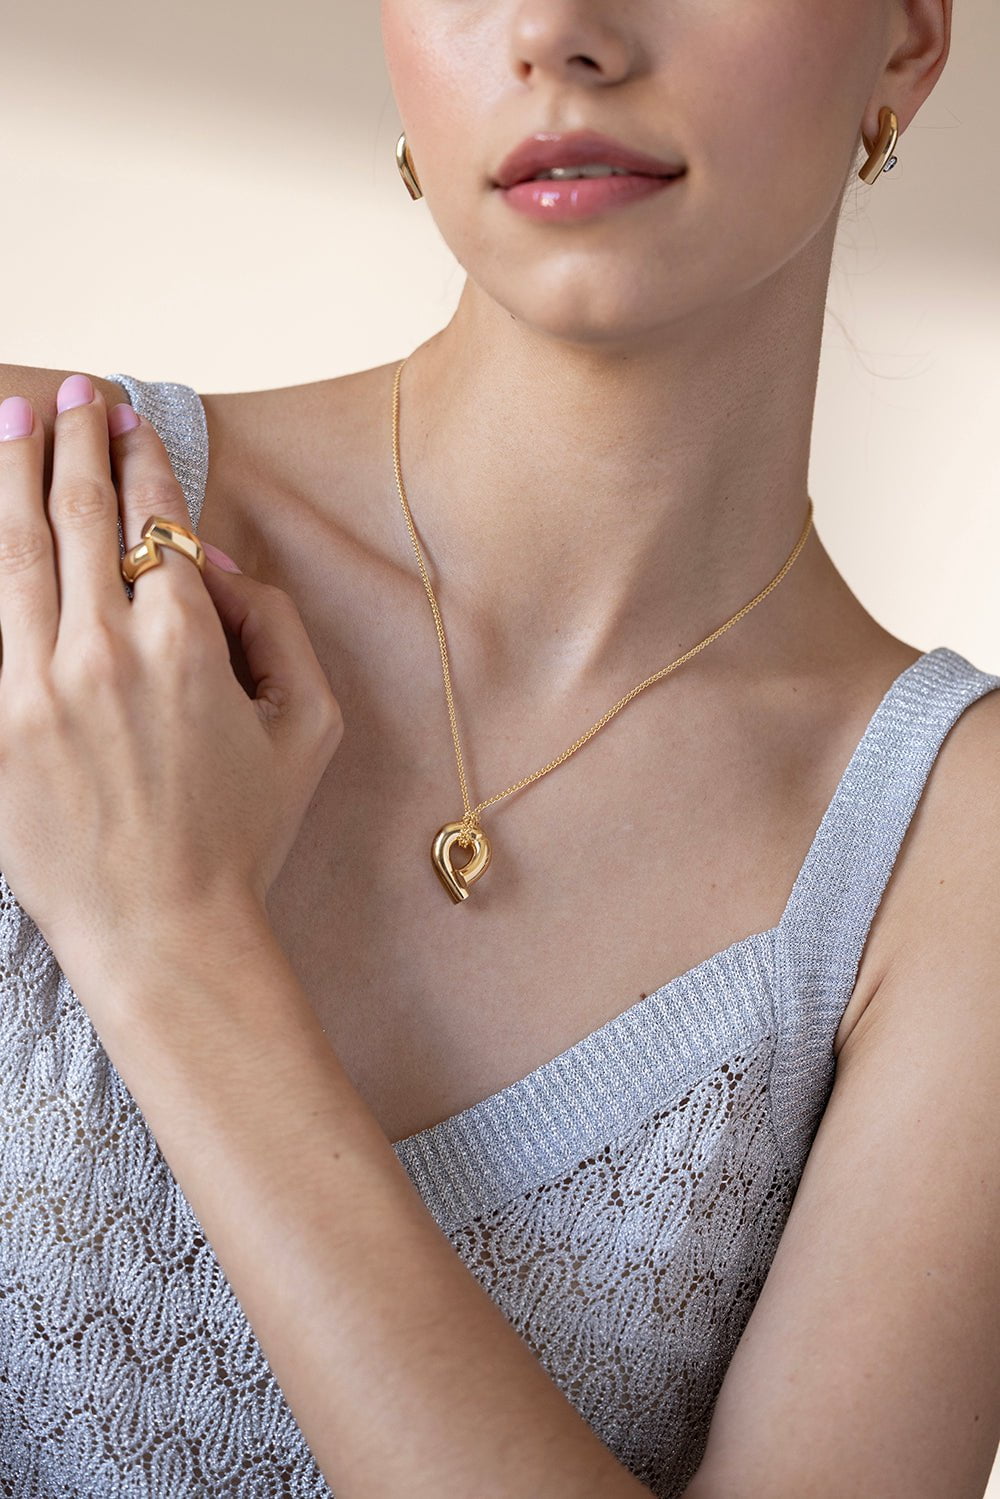 TABAYER-Oera Gold Pendant Necklace-YELLOW GOLD